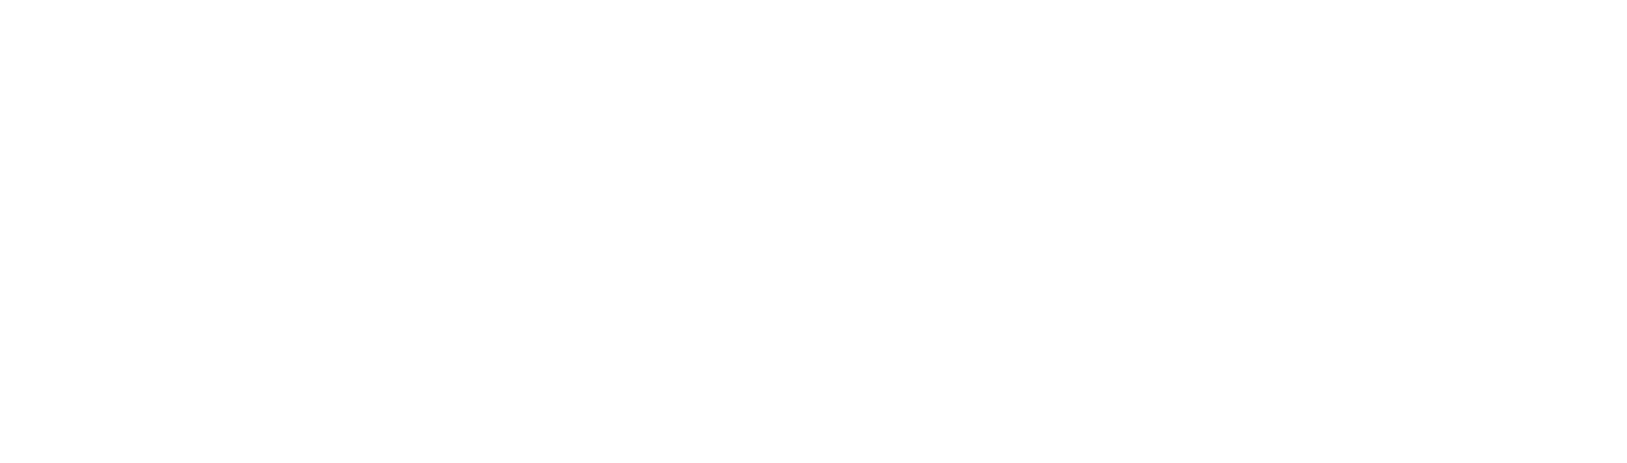 T.D. Jakes Foundation Logo link to home page